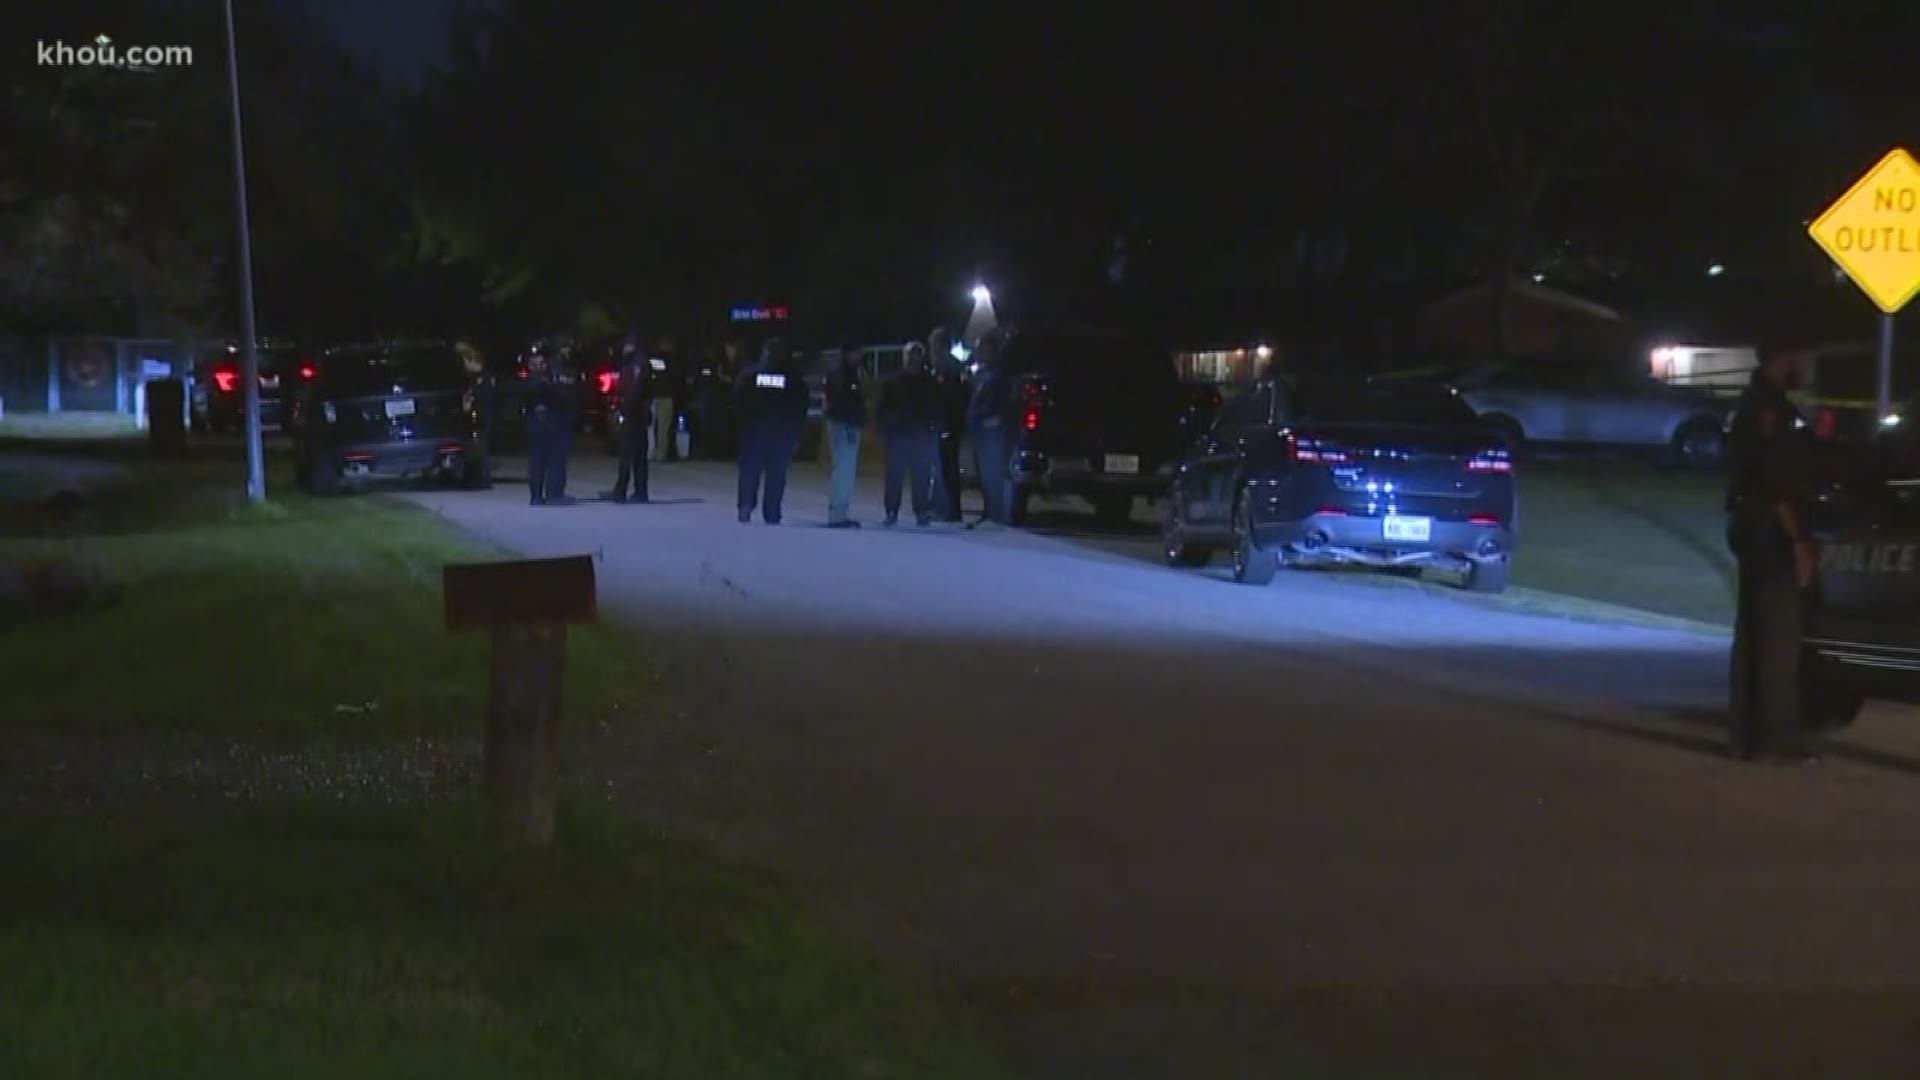 Police are responding to a reported officer-involved shooting in Missouri City.